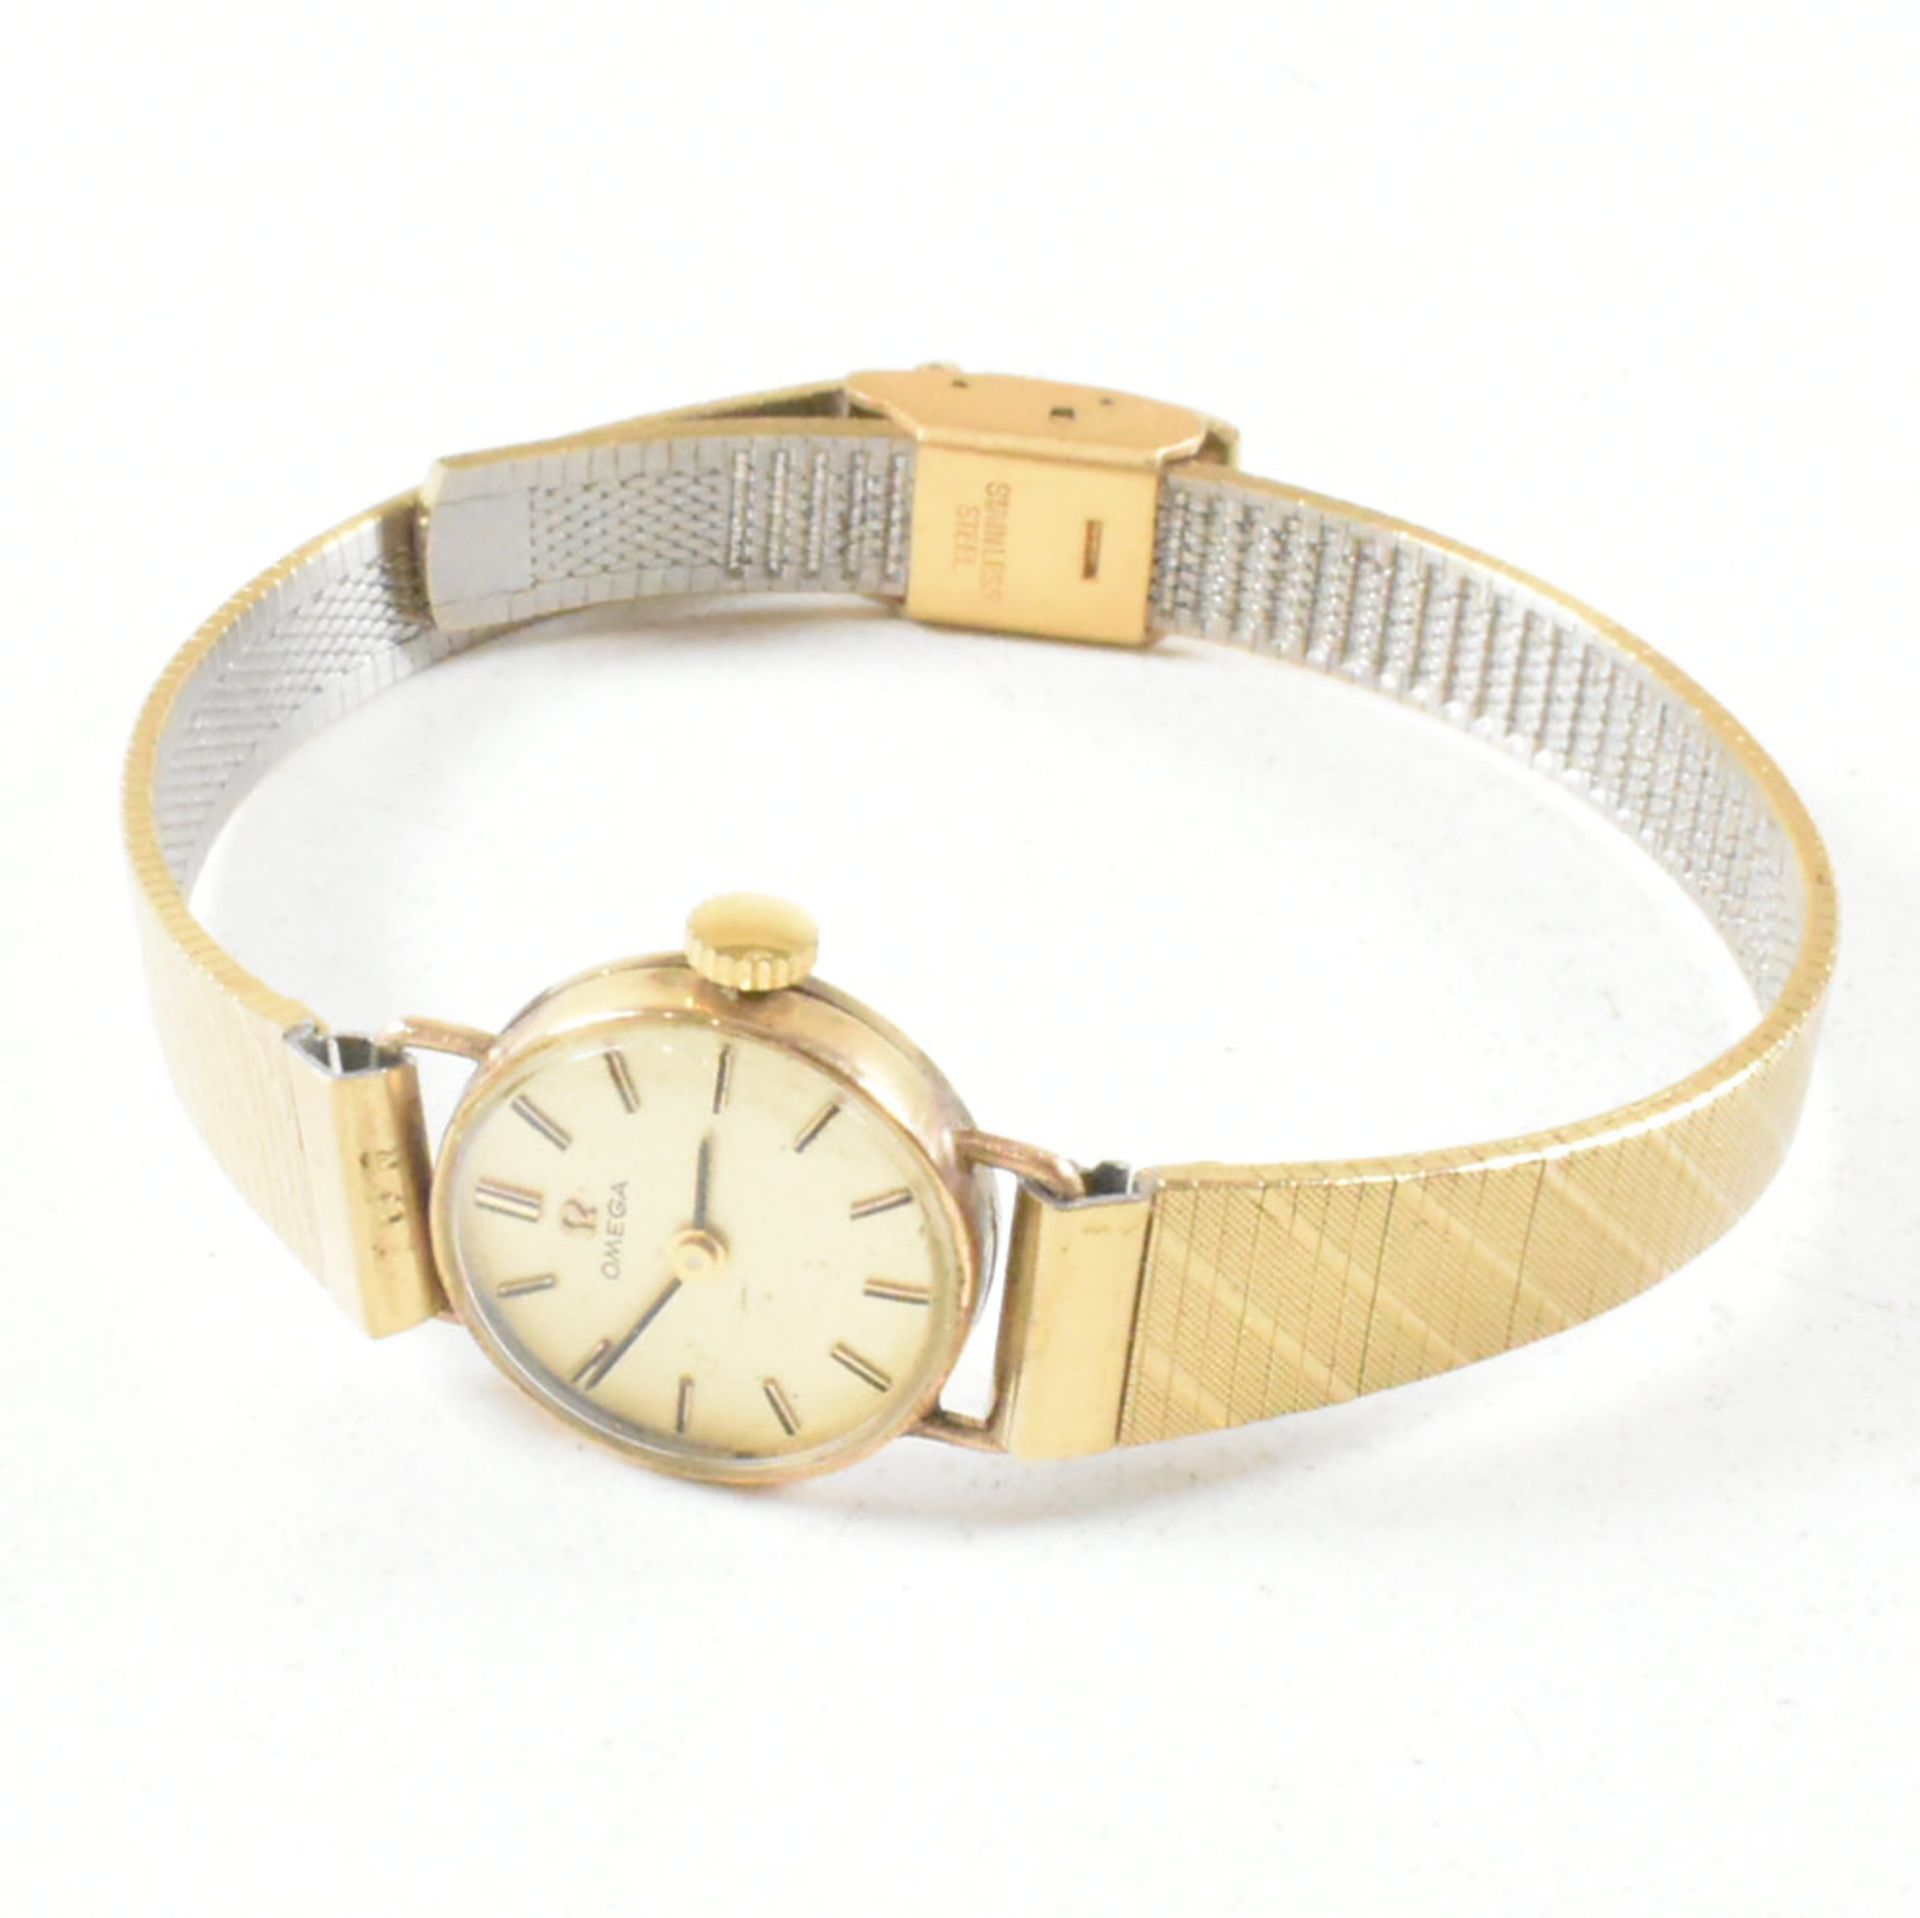 OMEGA HALLMARKED 9CT GOLD & STAINLESS STEEL COCKTAIL WATCH - Image 7 of 8